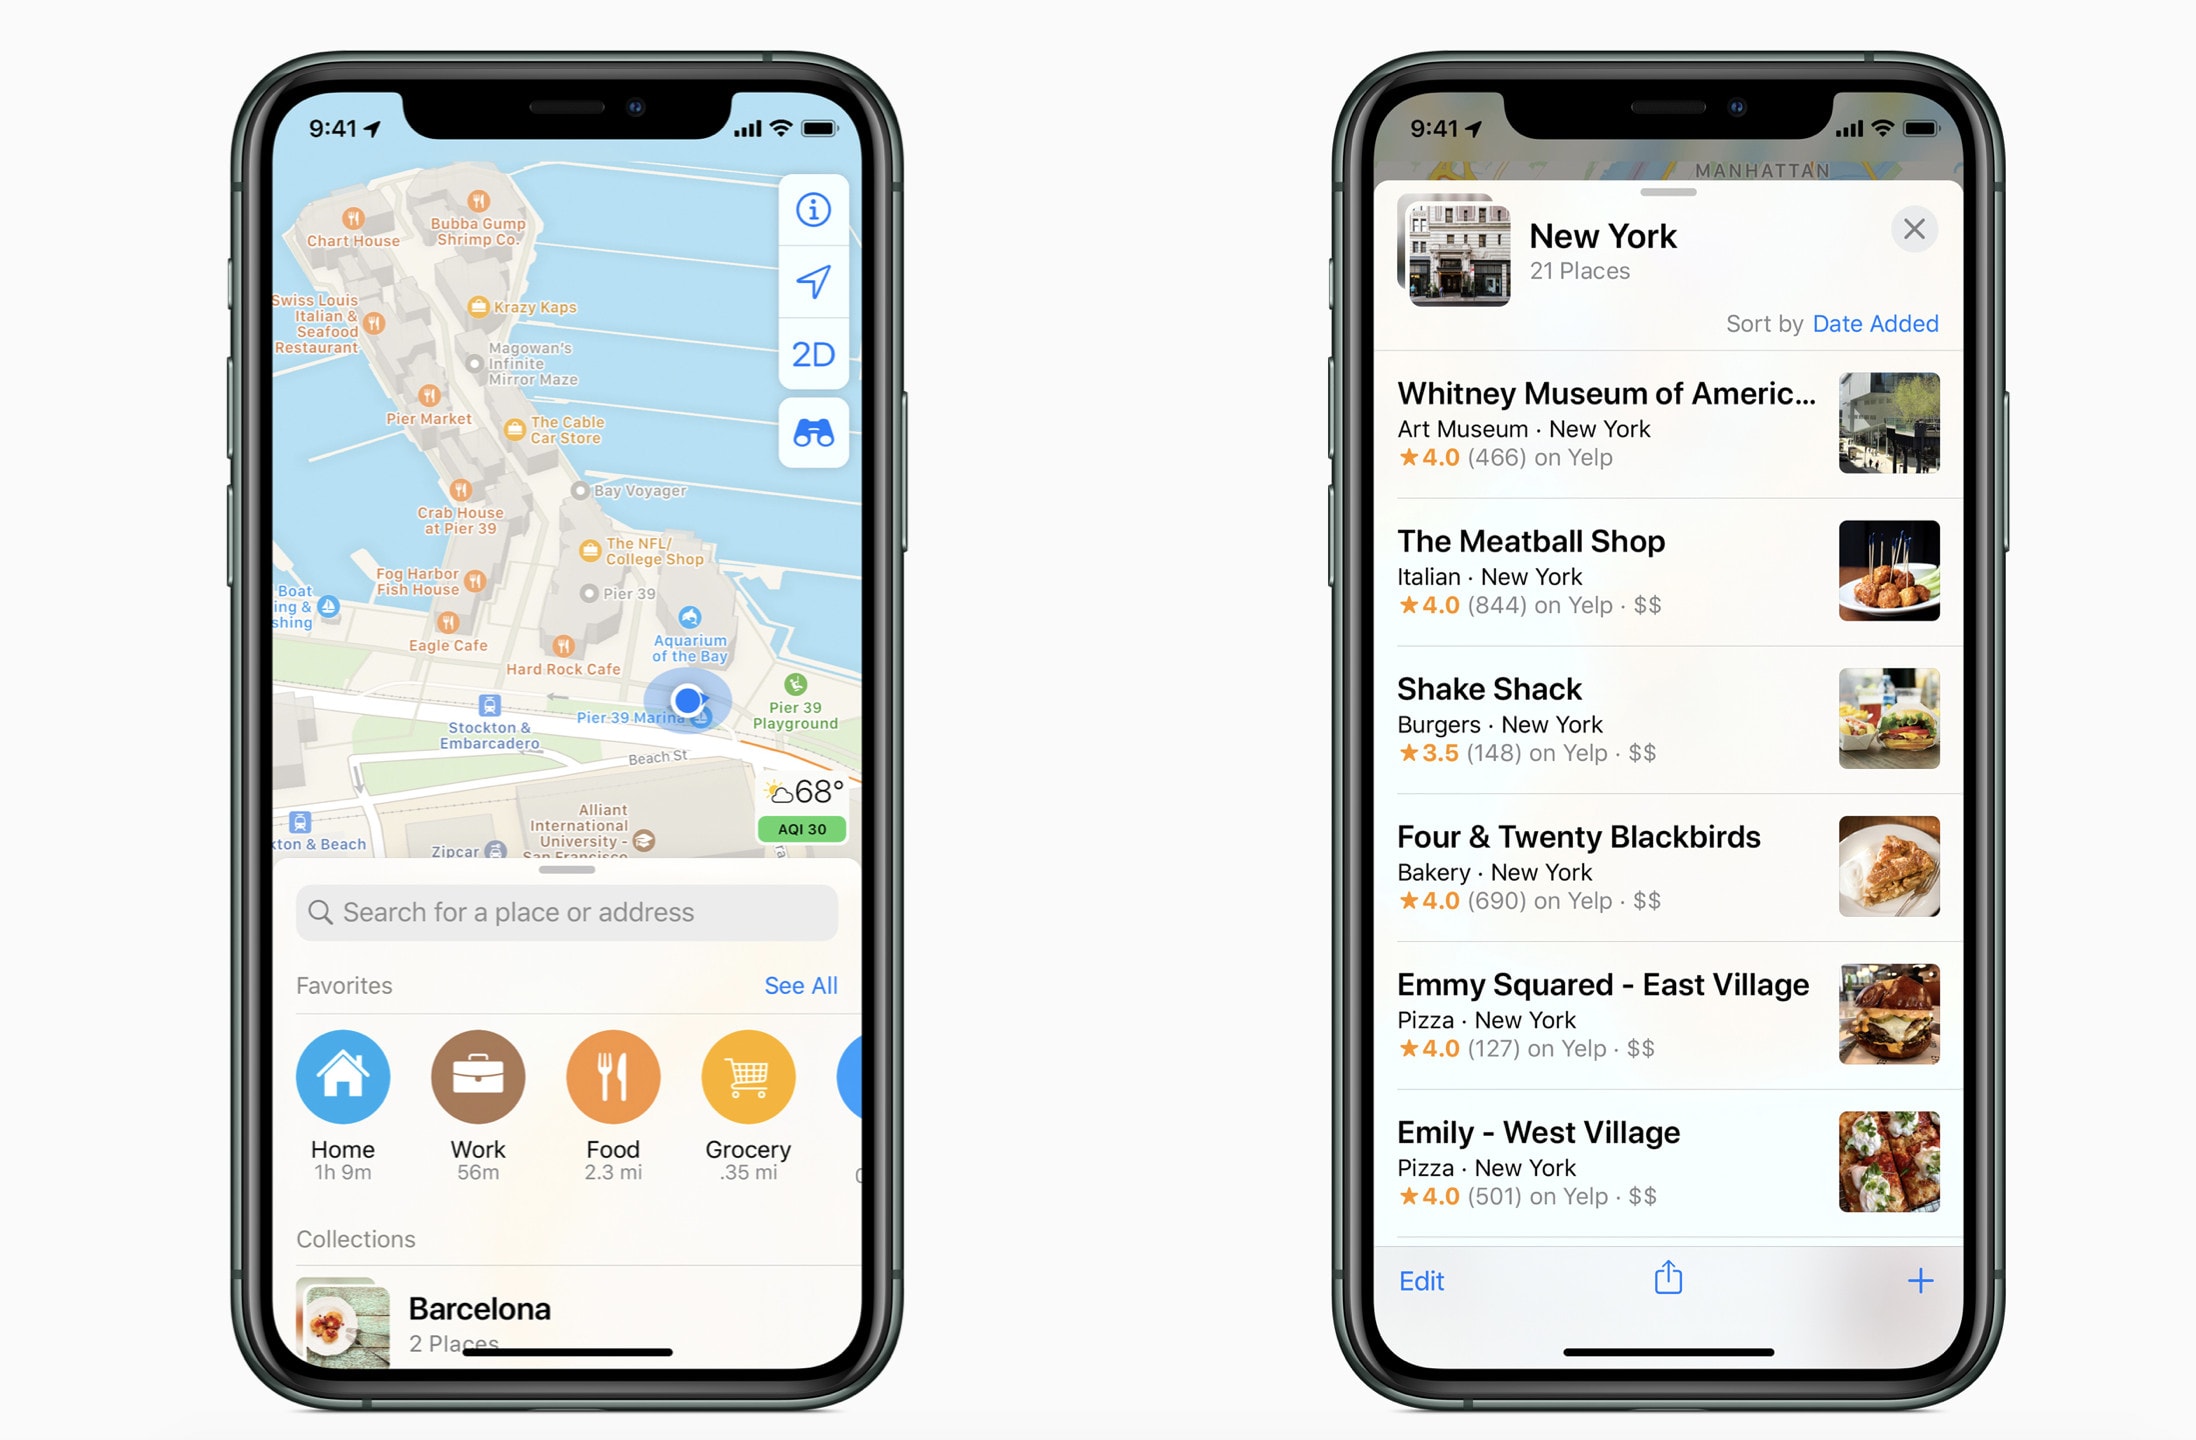 Apple Maps Favorites and Collections are new in this update